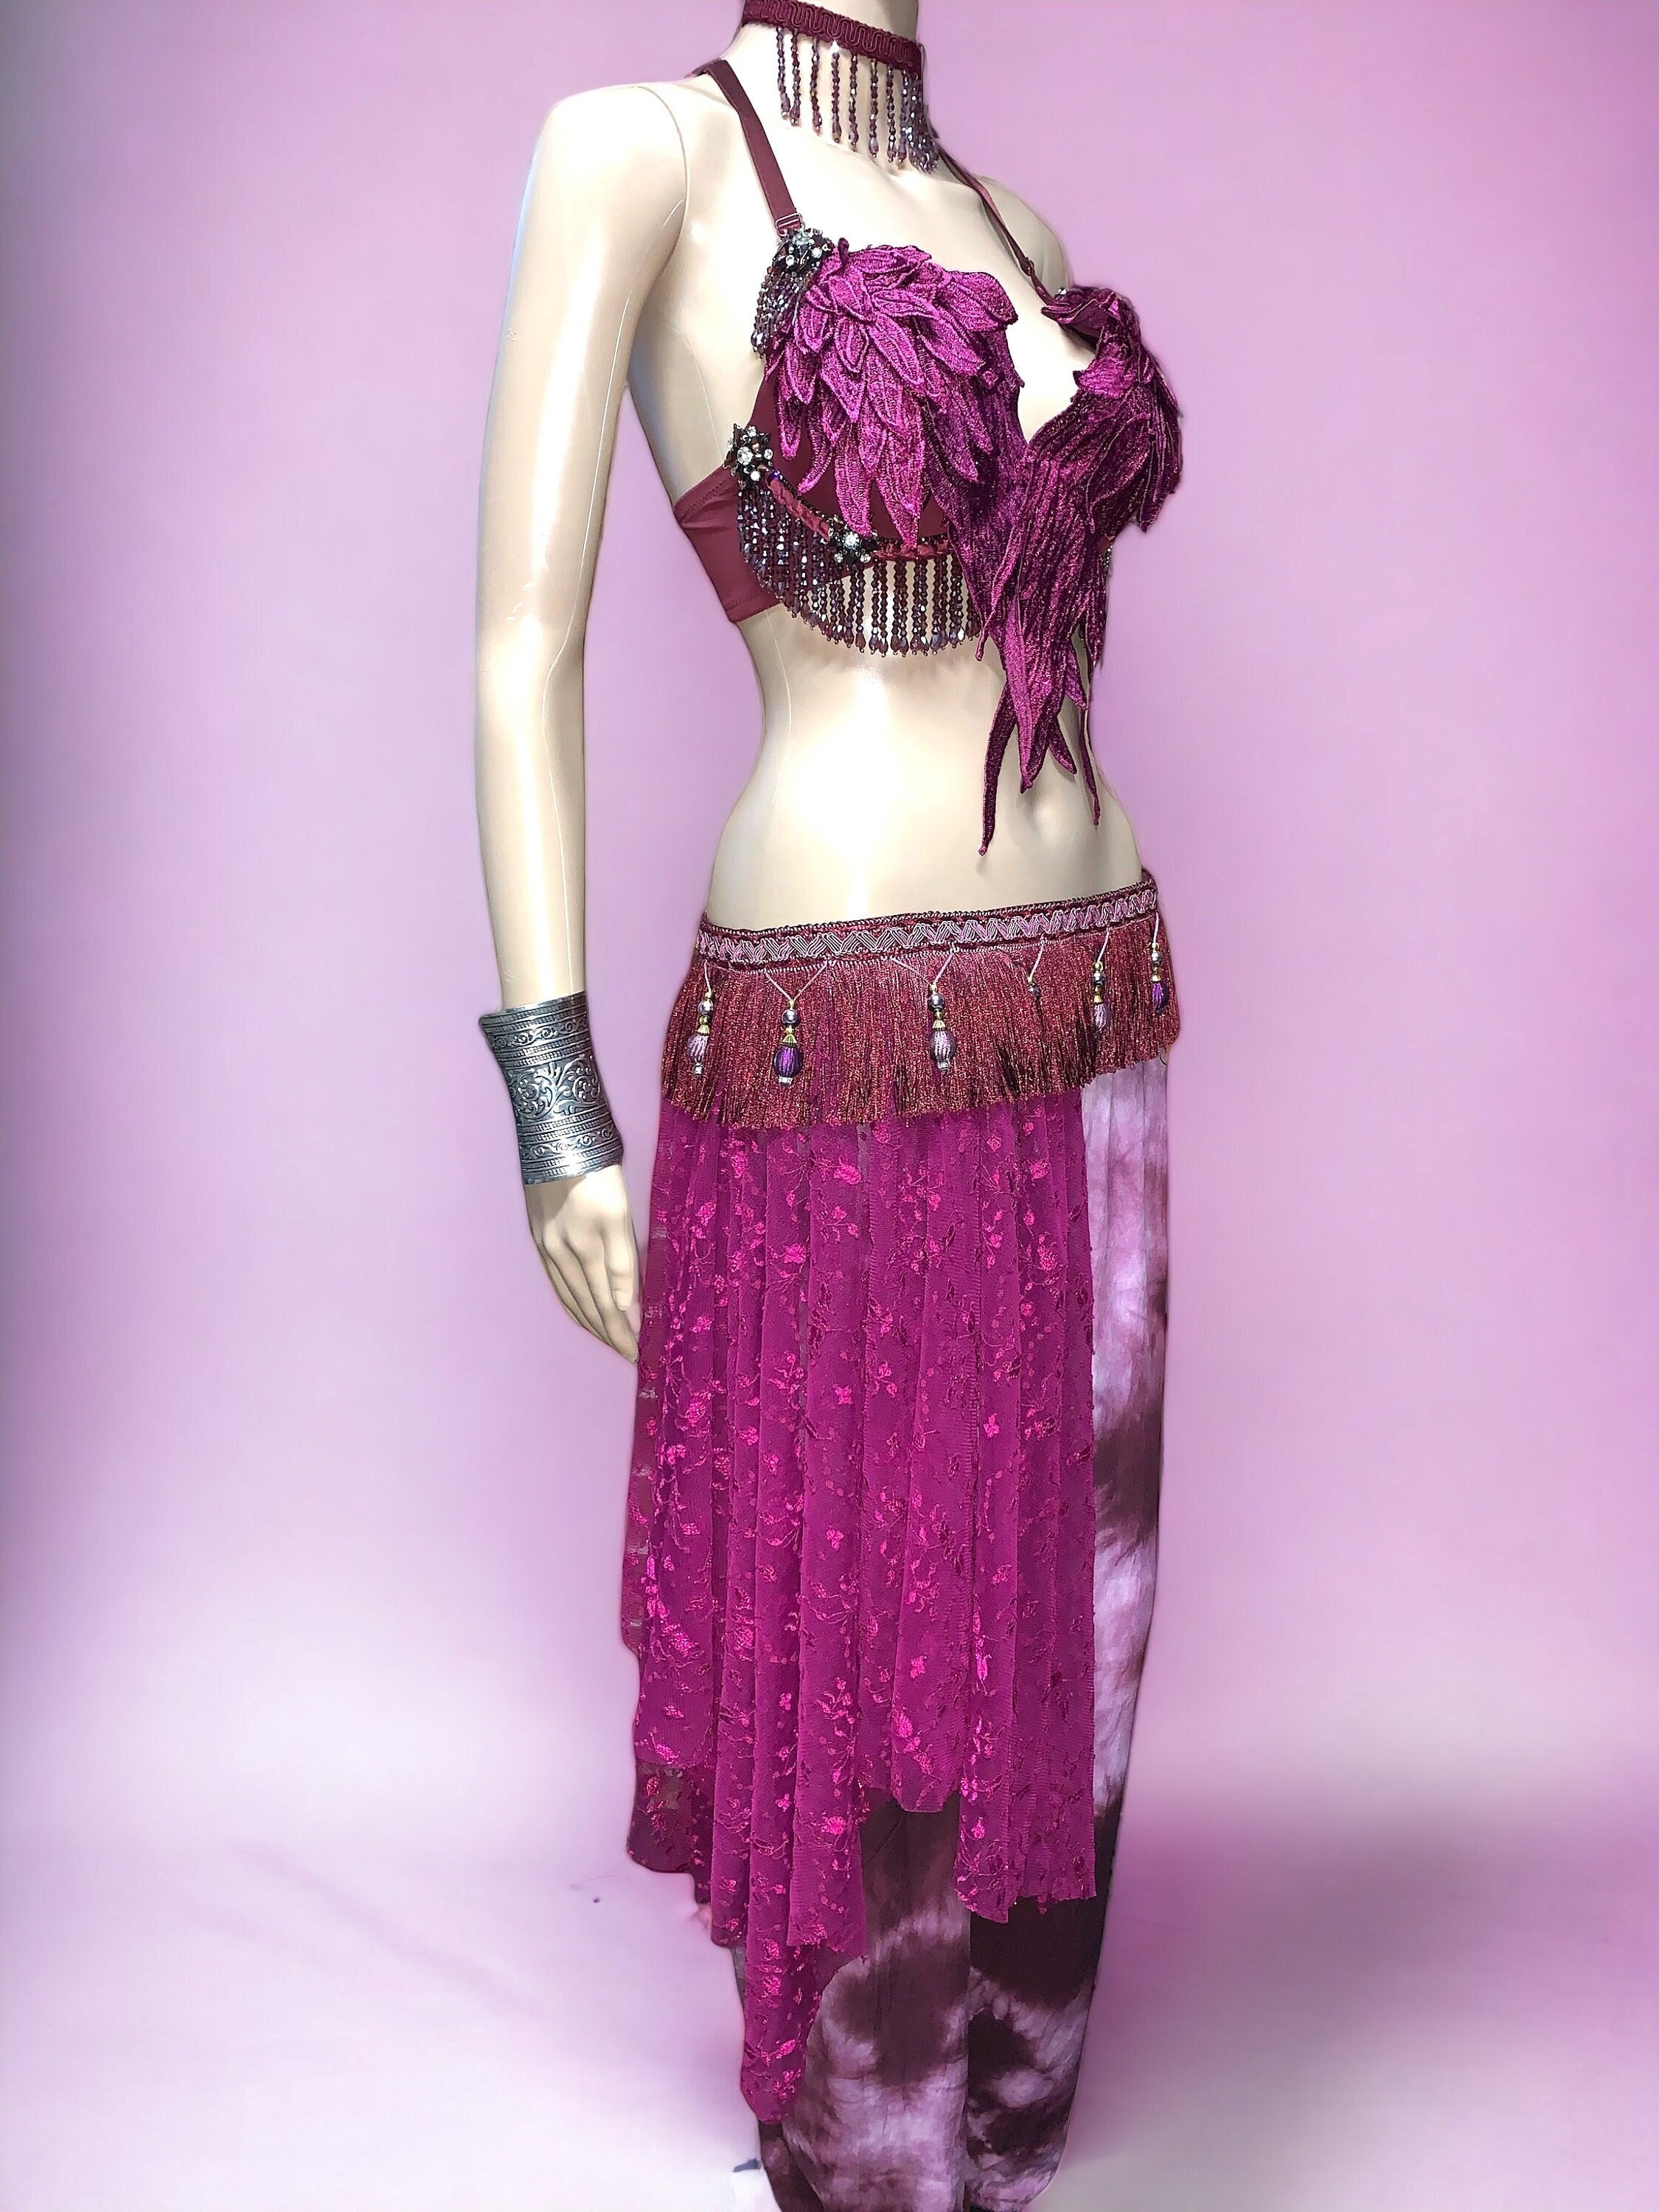 Tribal Bra Size 85 C, US 38 B for ATS, Tribal Style Dance, Tribal Fusion,  Bellydance OOAK -  India